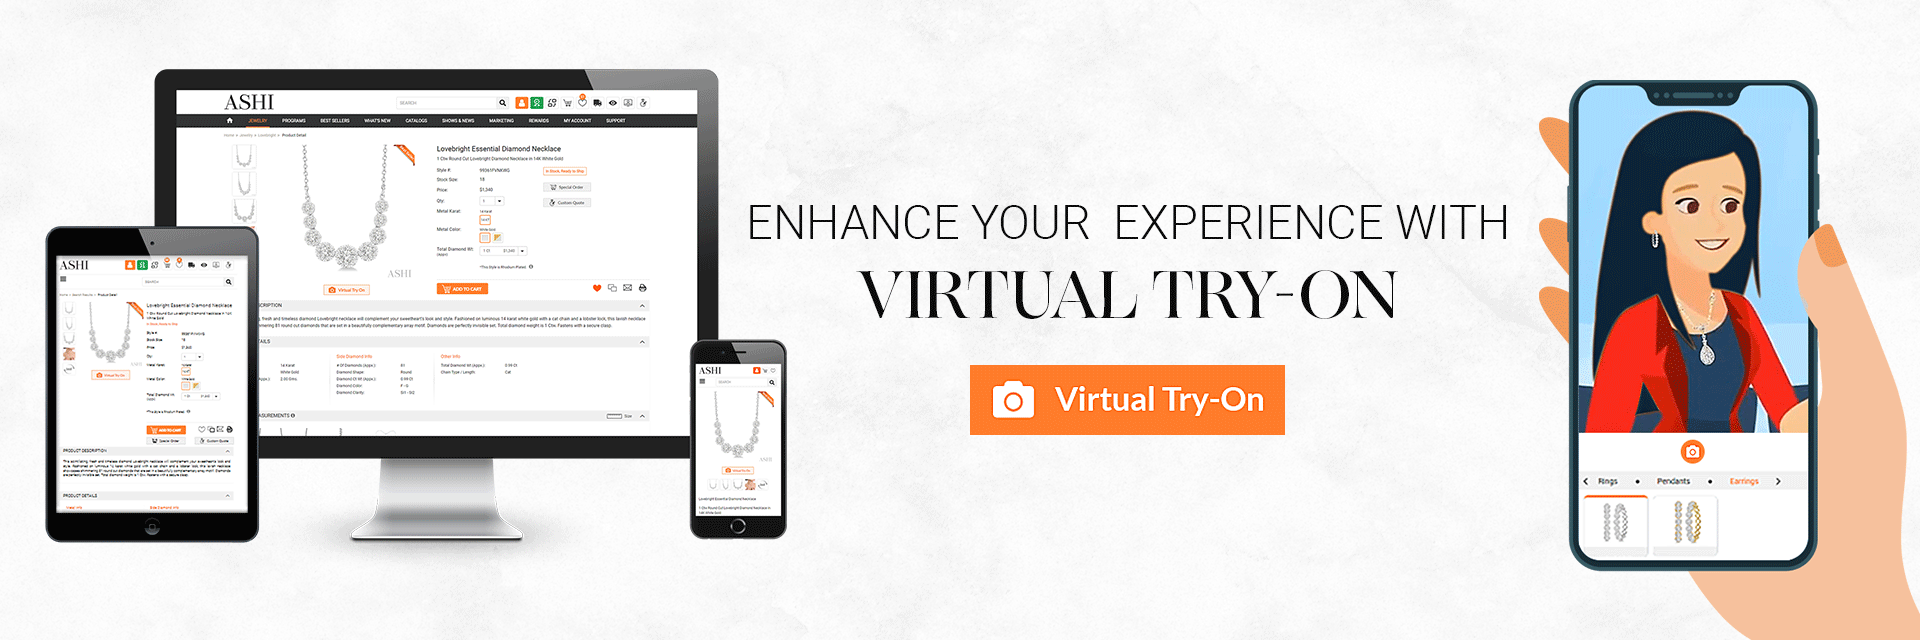 Enhance Your Experience with Virtual Try-On